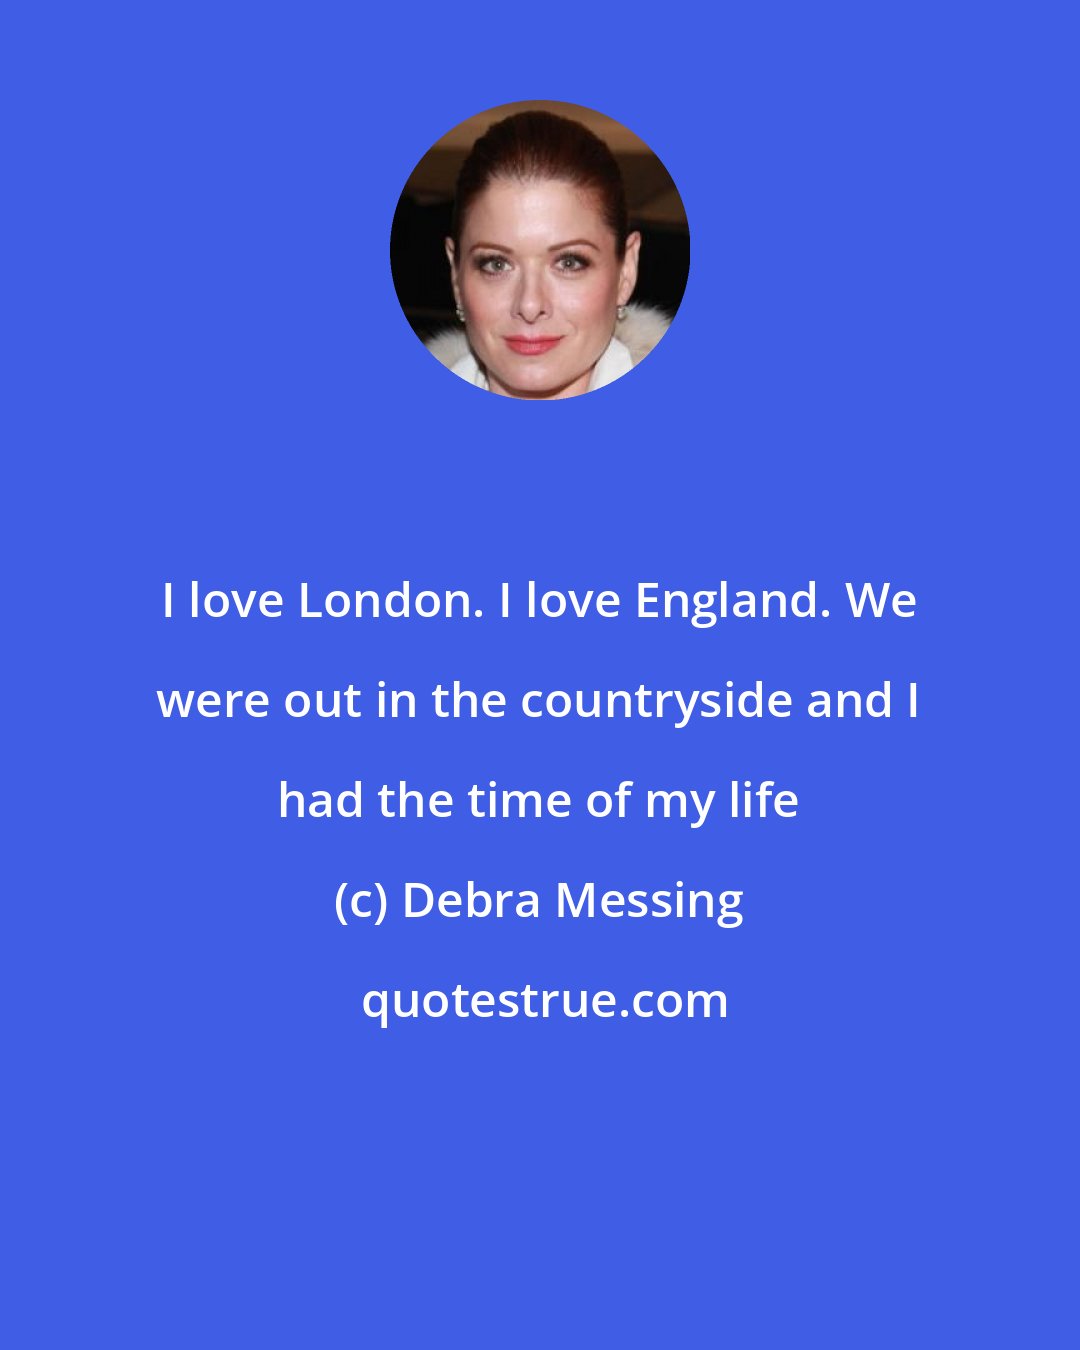 Debra Messing: I love London. I love England. We were out in the countryside and I had the time of my life